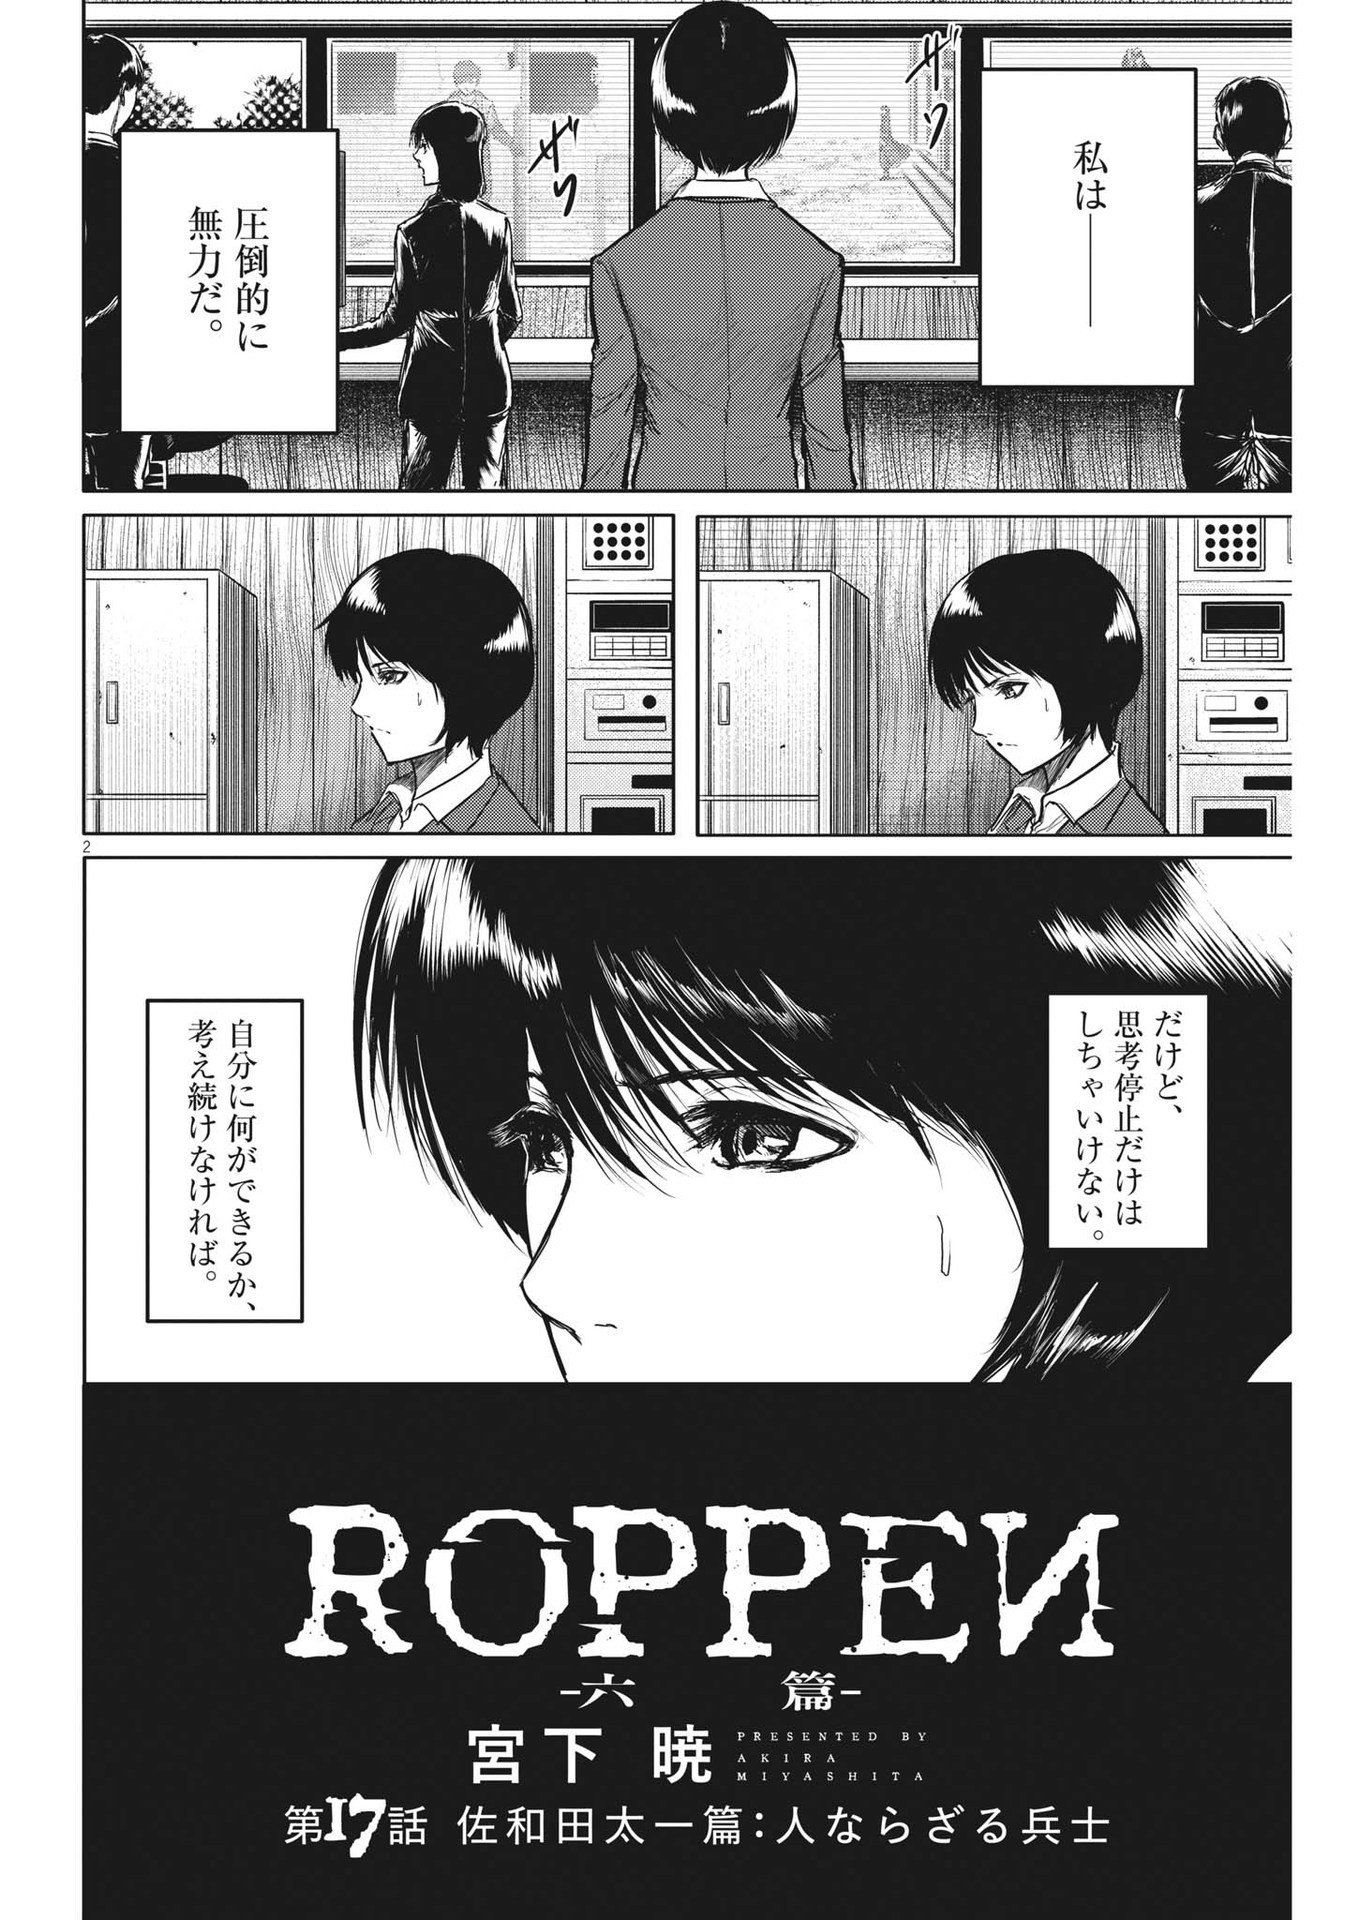 Roppen - Chapter 17 - Page 2